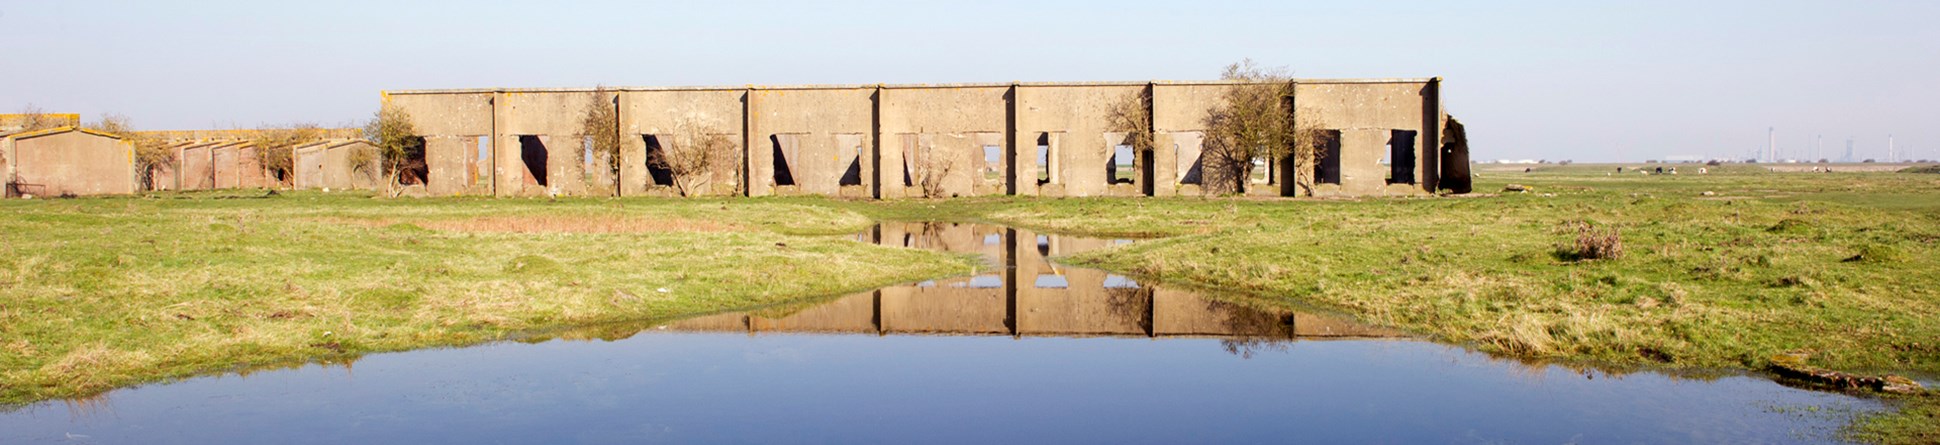 Ruined concrete First World War explosives factory reflected in the marshes of the Hoo Peninsula